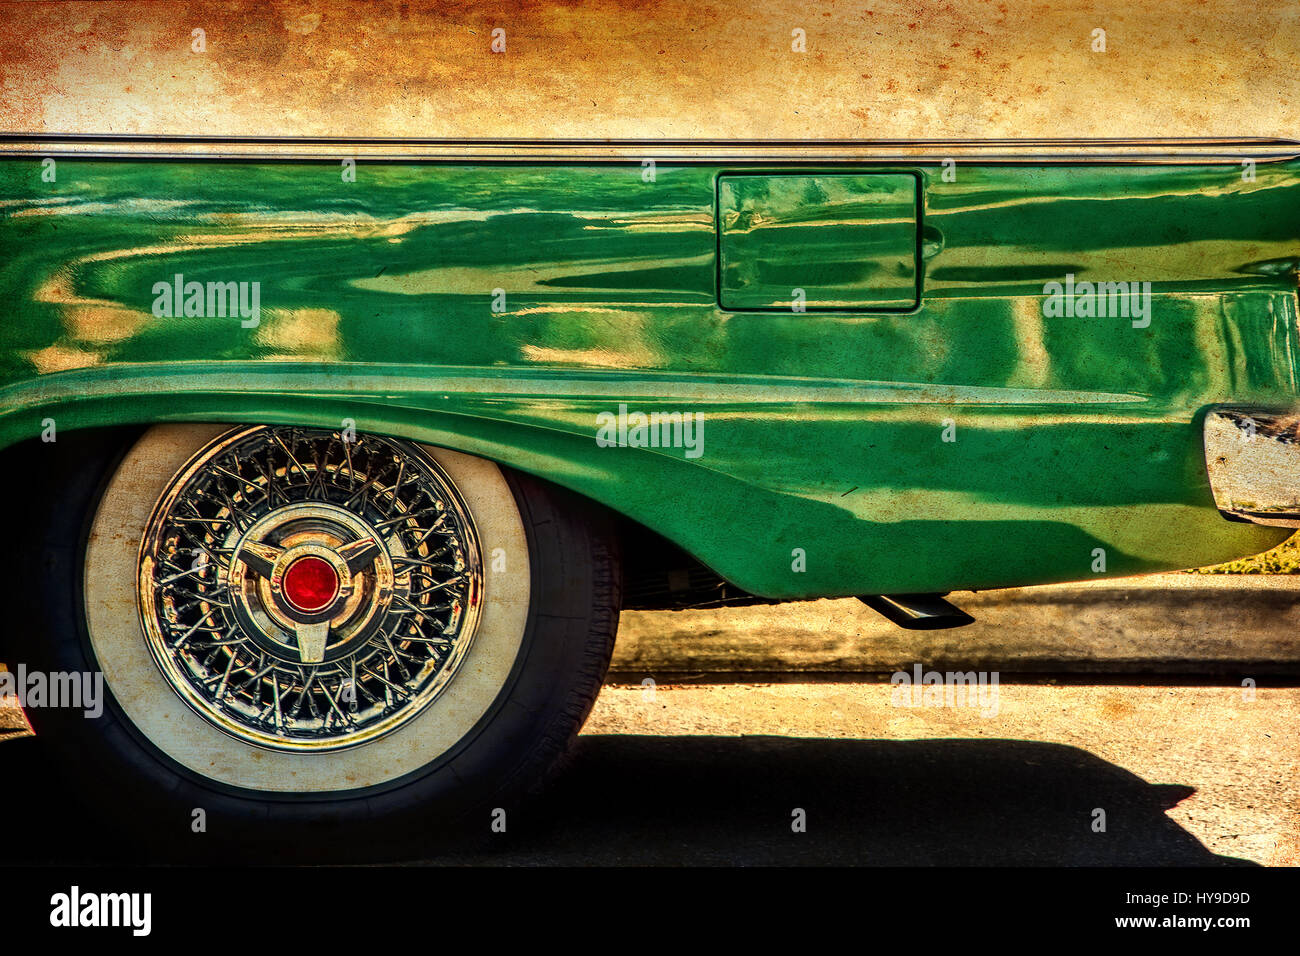 The rear end of a classic American car in southern California. Stock Photo